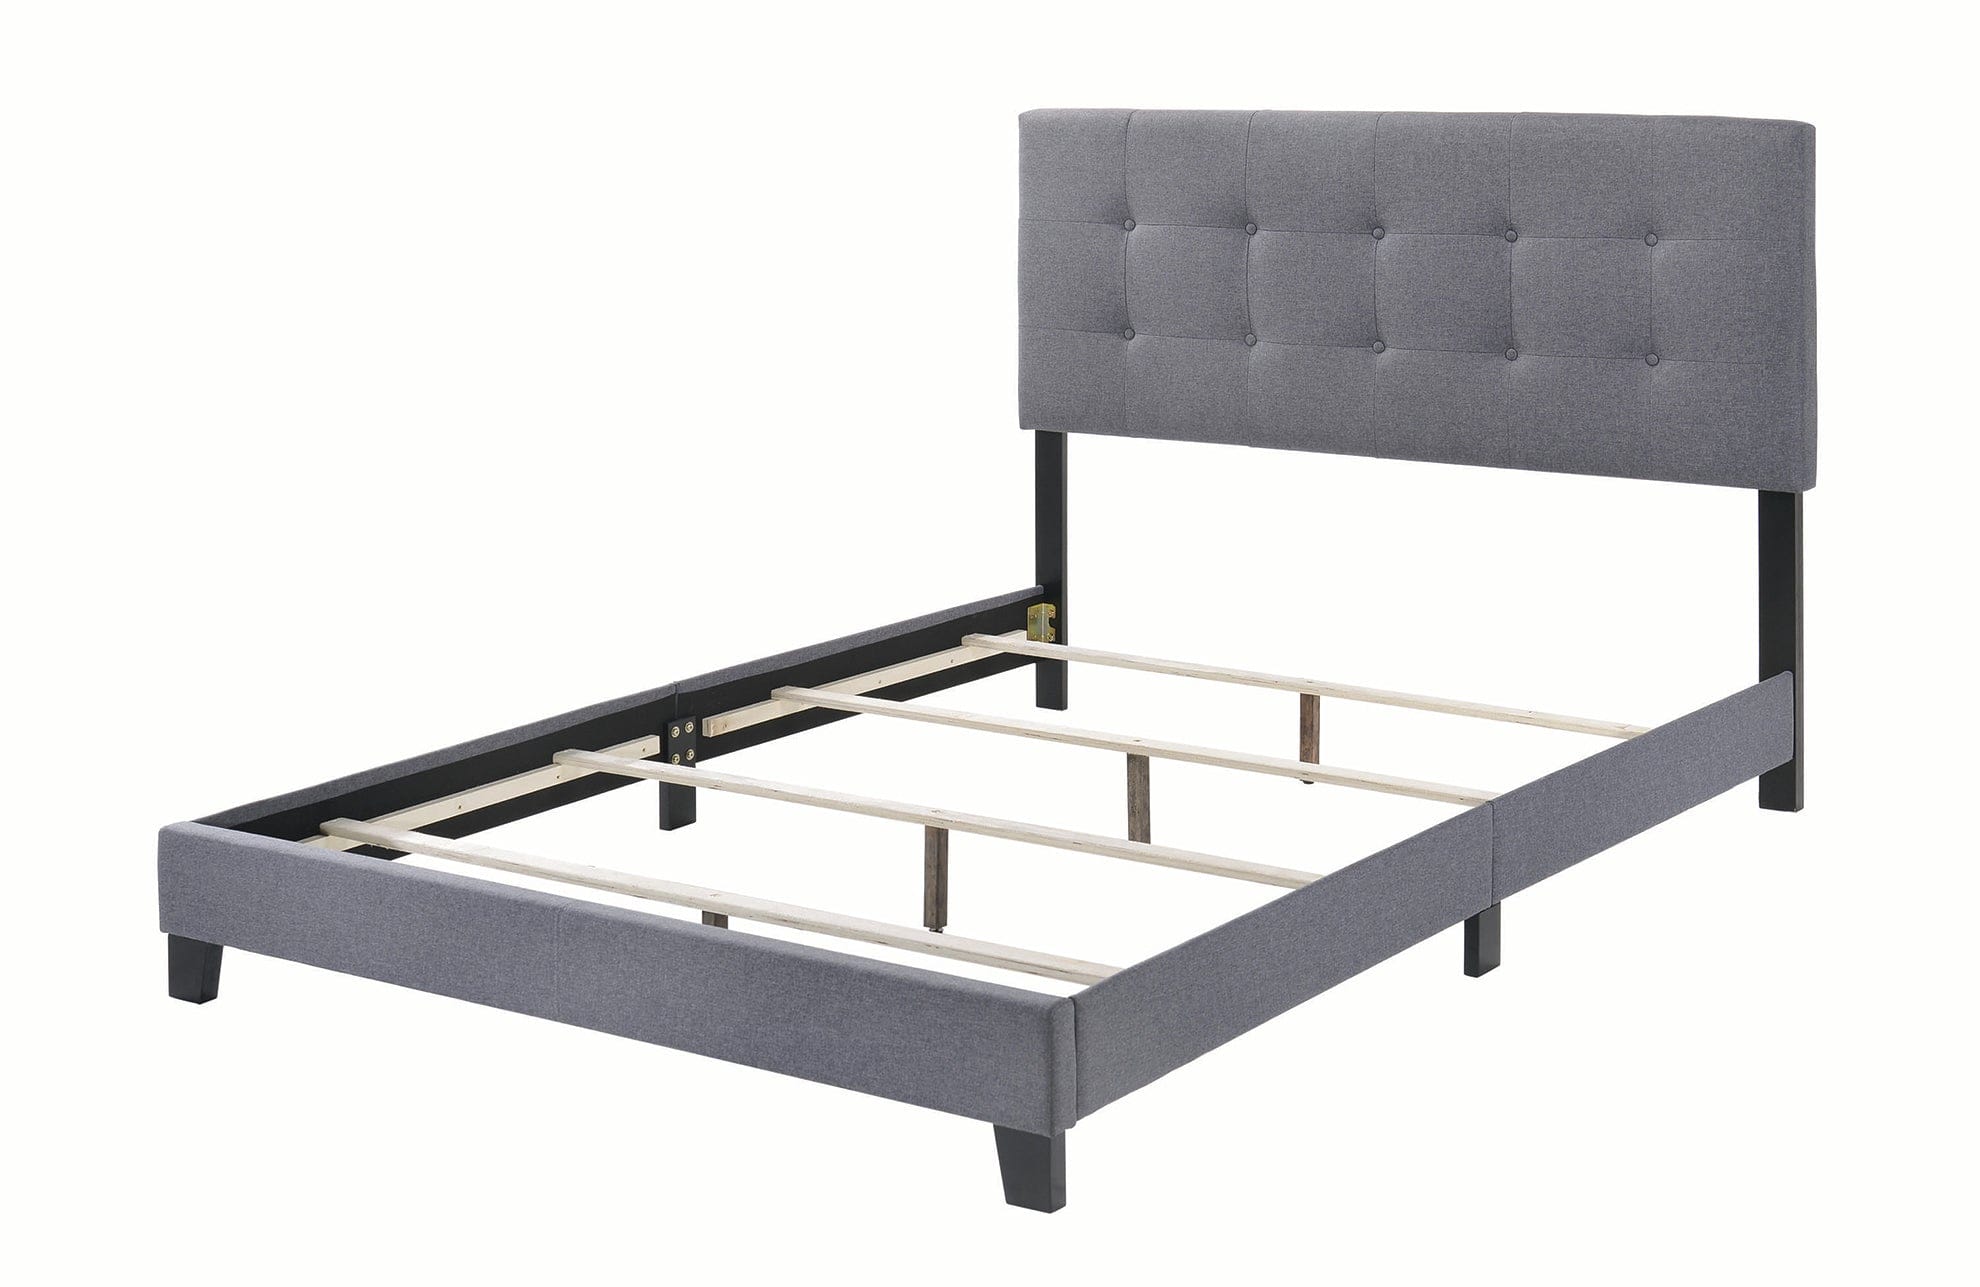 Mapes Tufted Upholstered Full Bed Grey - 305747F